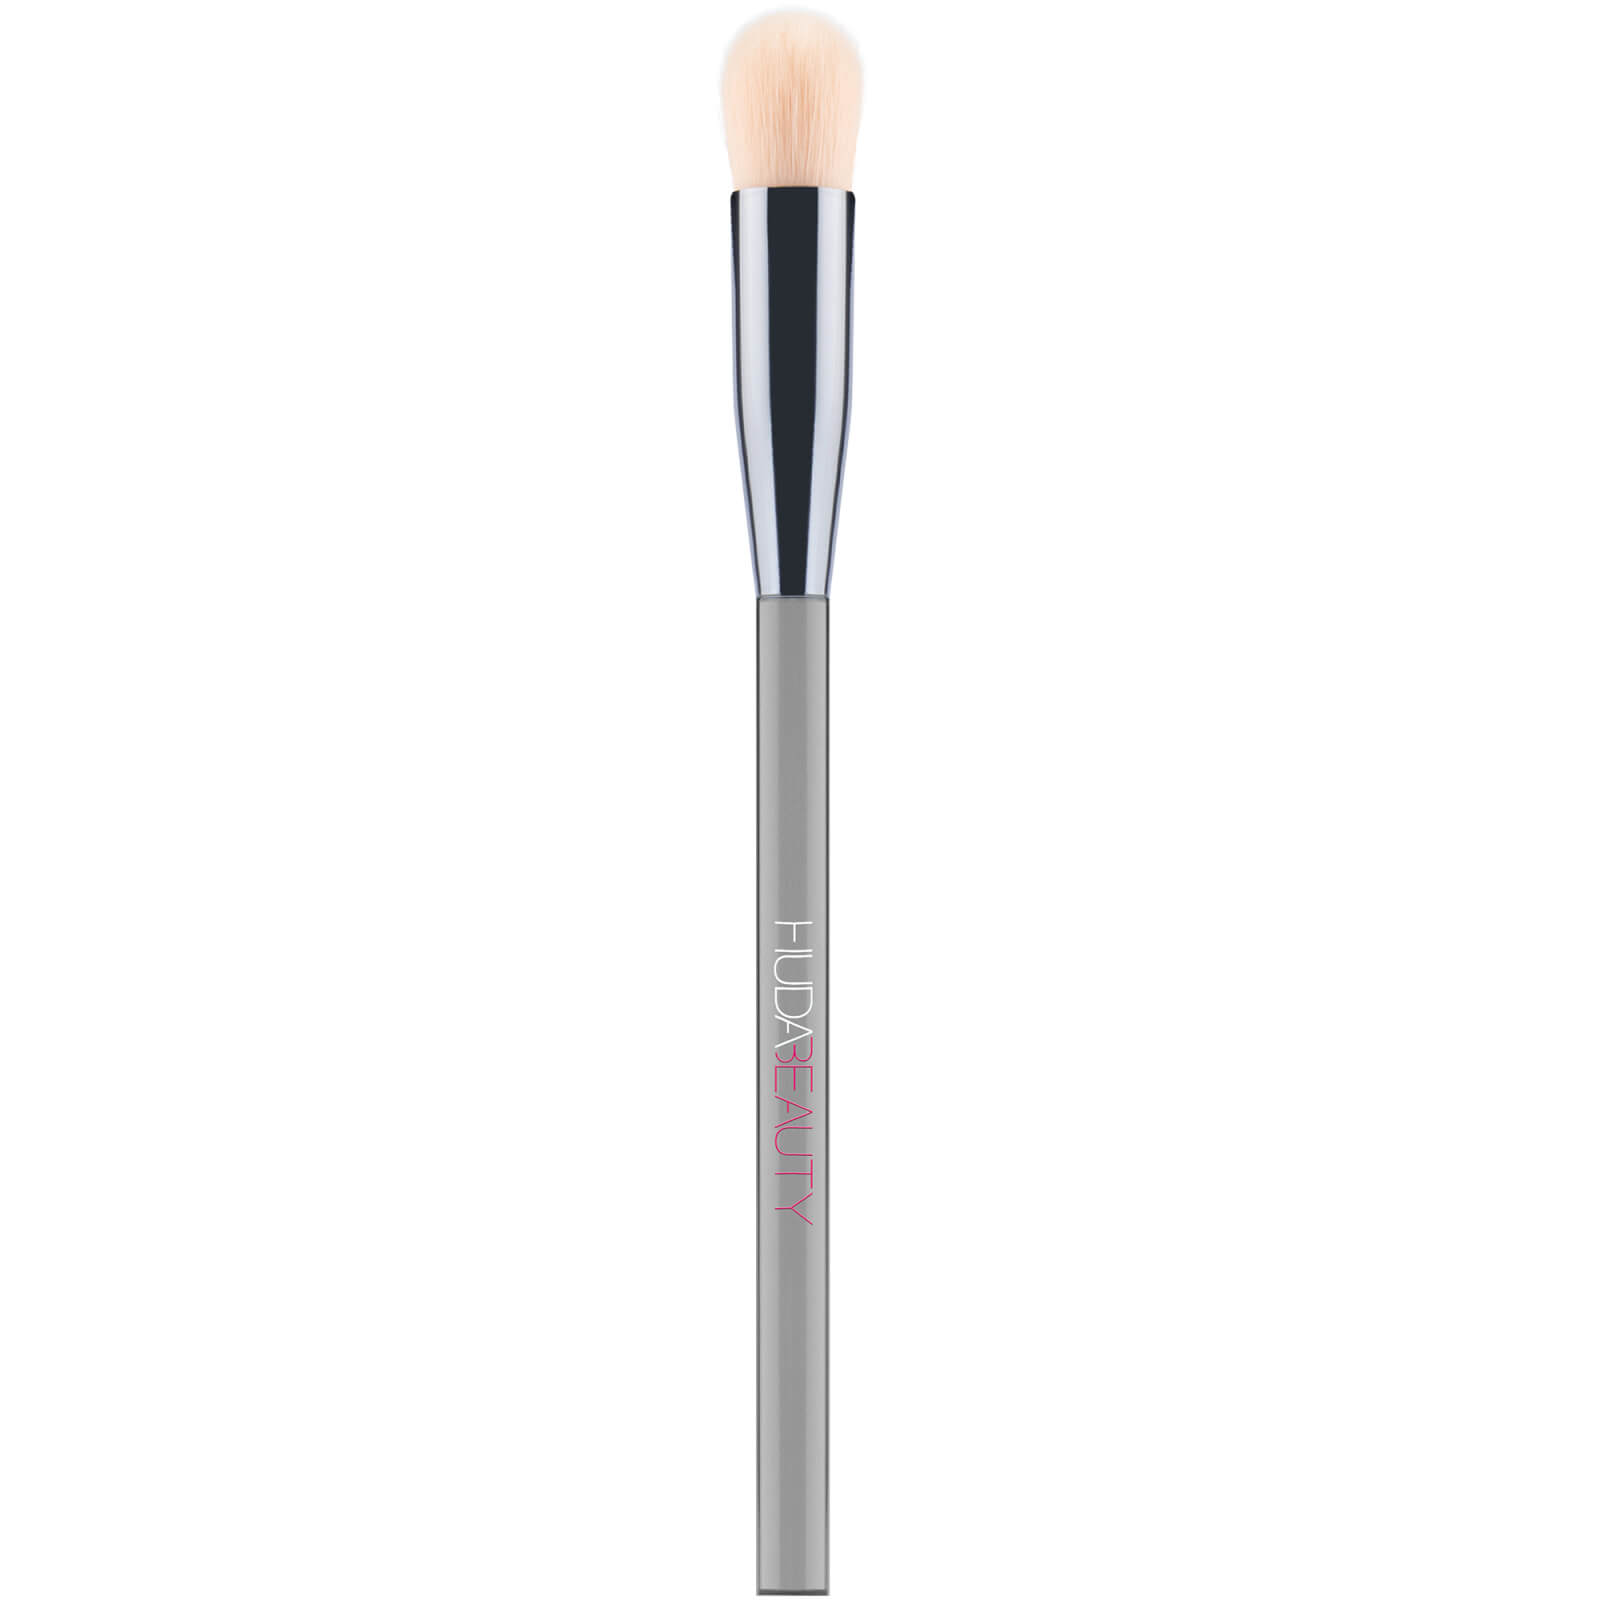 Photos - Makeup Brush / Sponge Huda Beauty Face Conceal and Blend Complexion Brush 